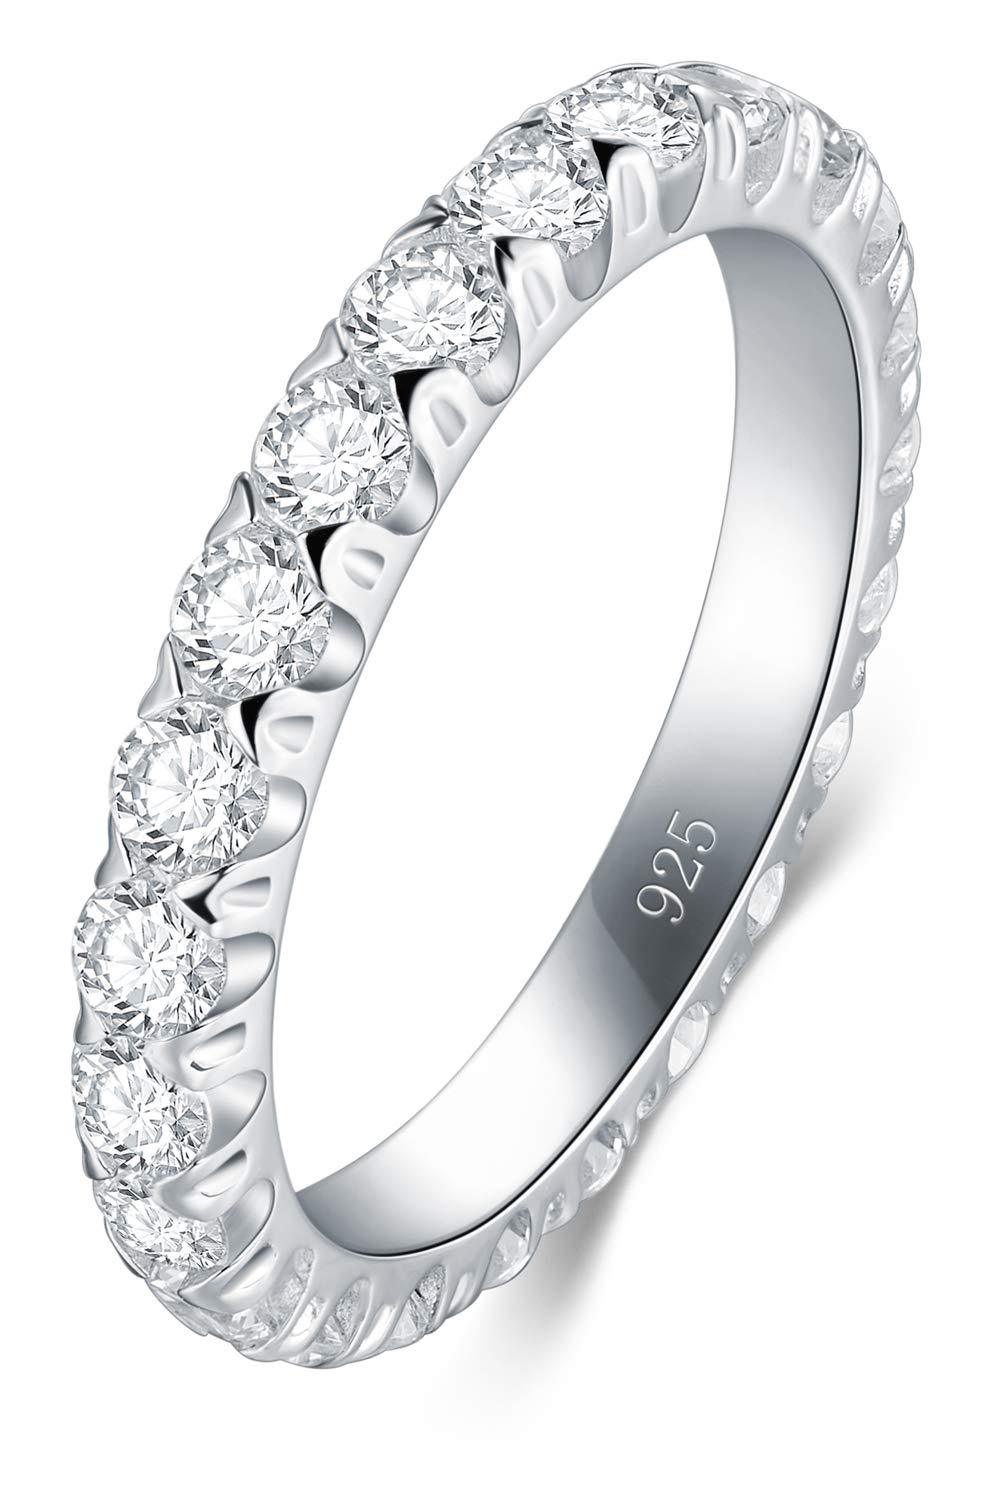 [Australia] - BORUO 925 Sterling Silver Ring, Cubic Zirconia CZ Wedding Band Stackable Ring Size 4-12 3mm 